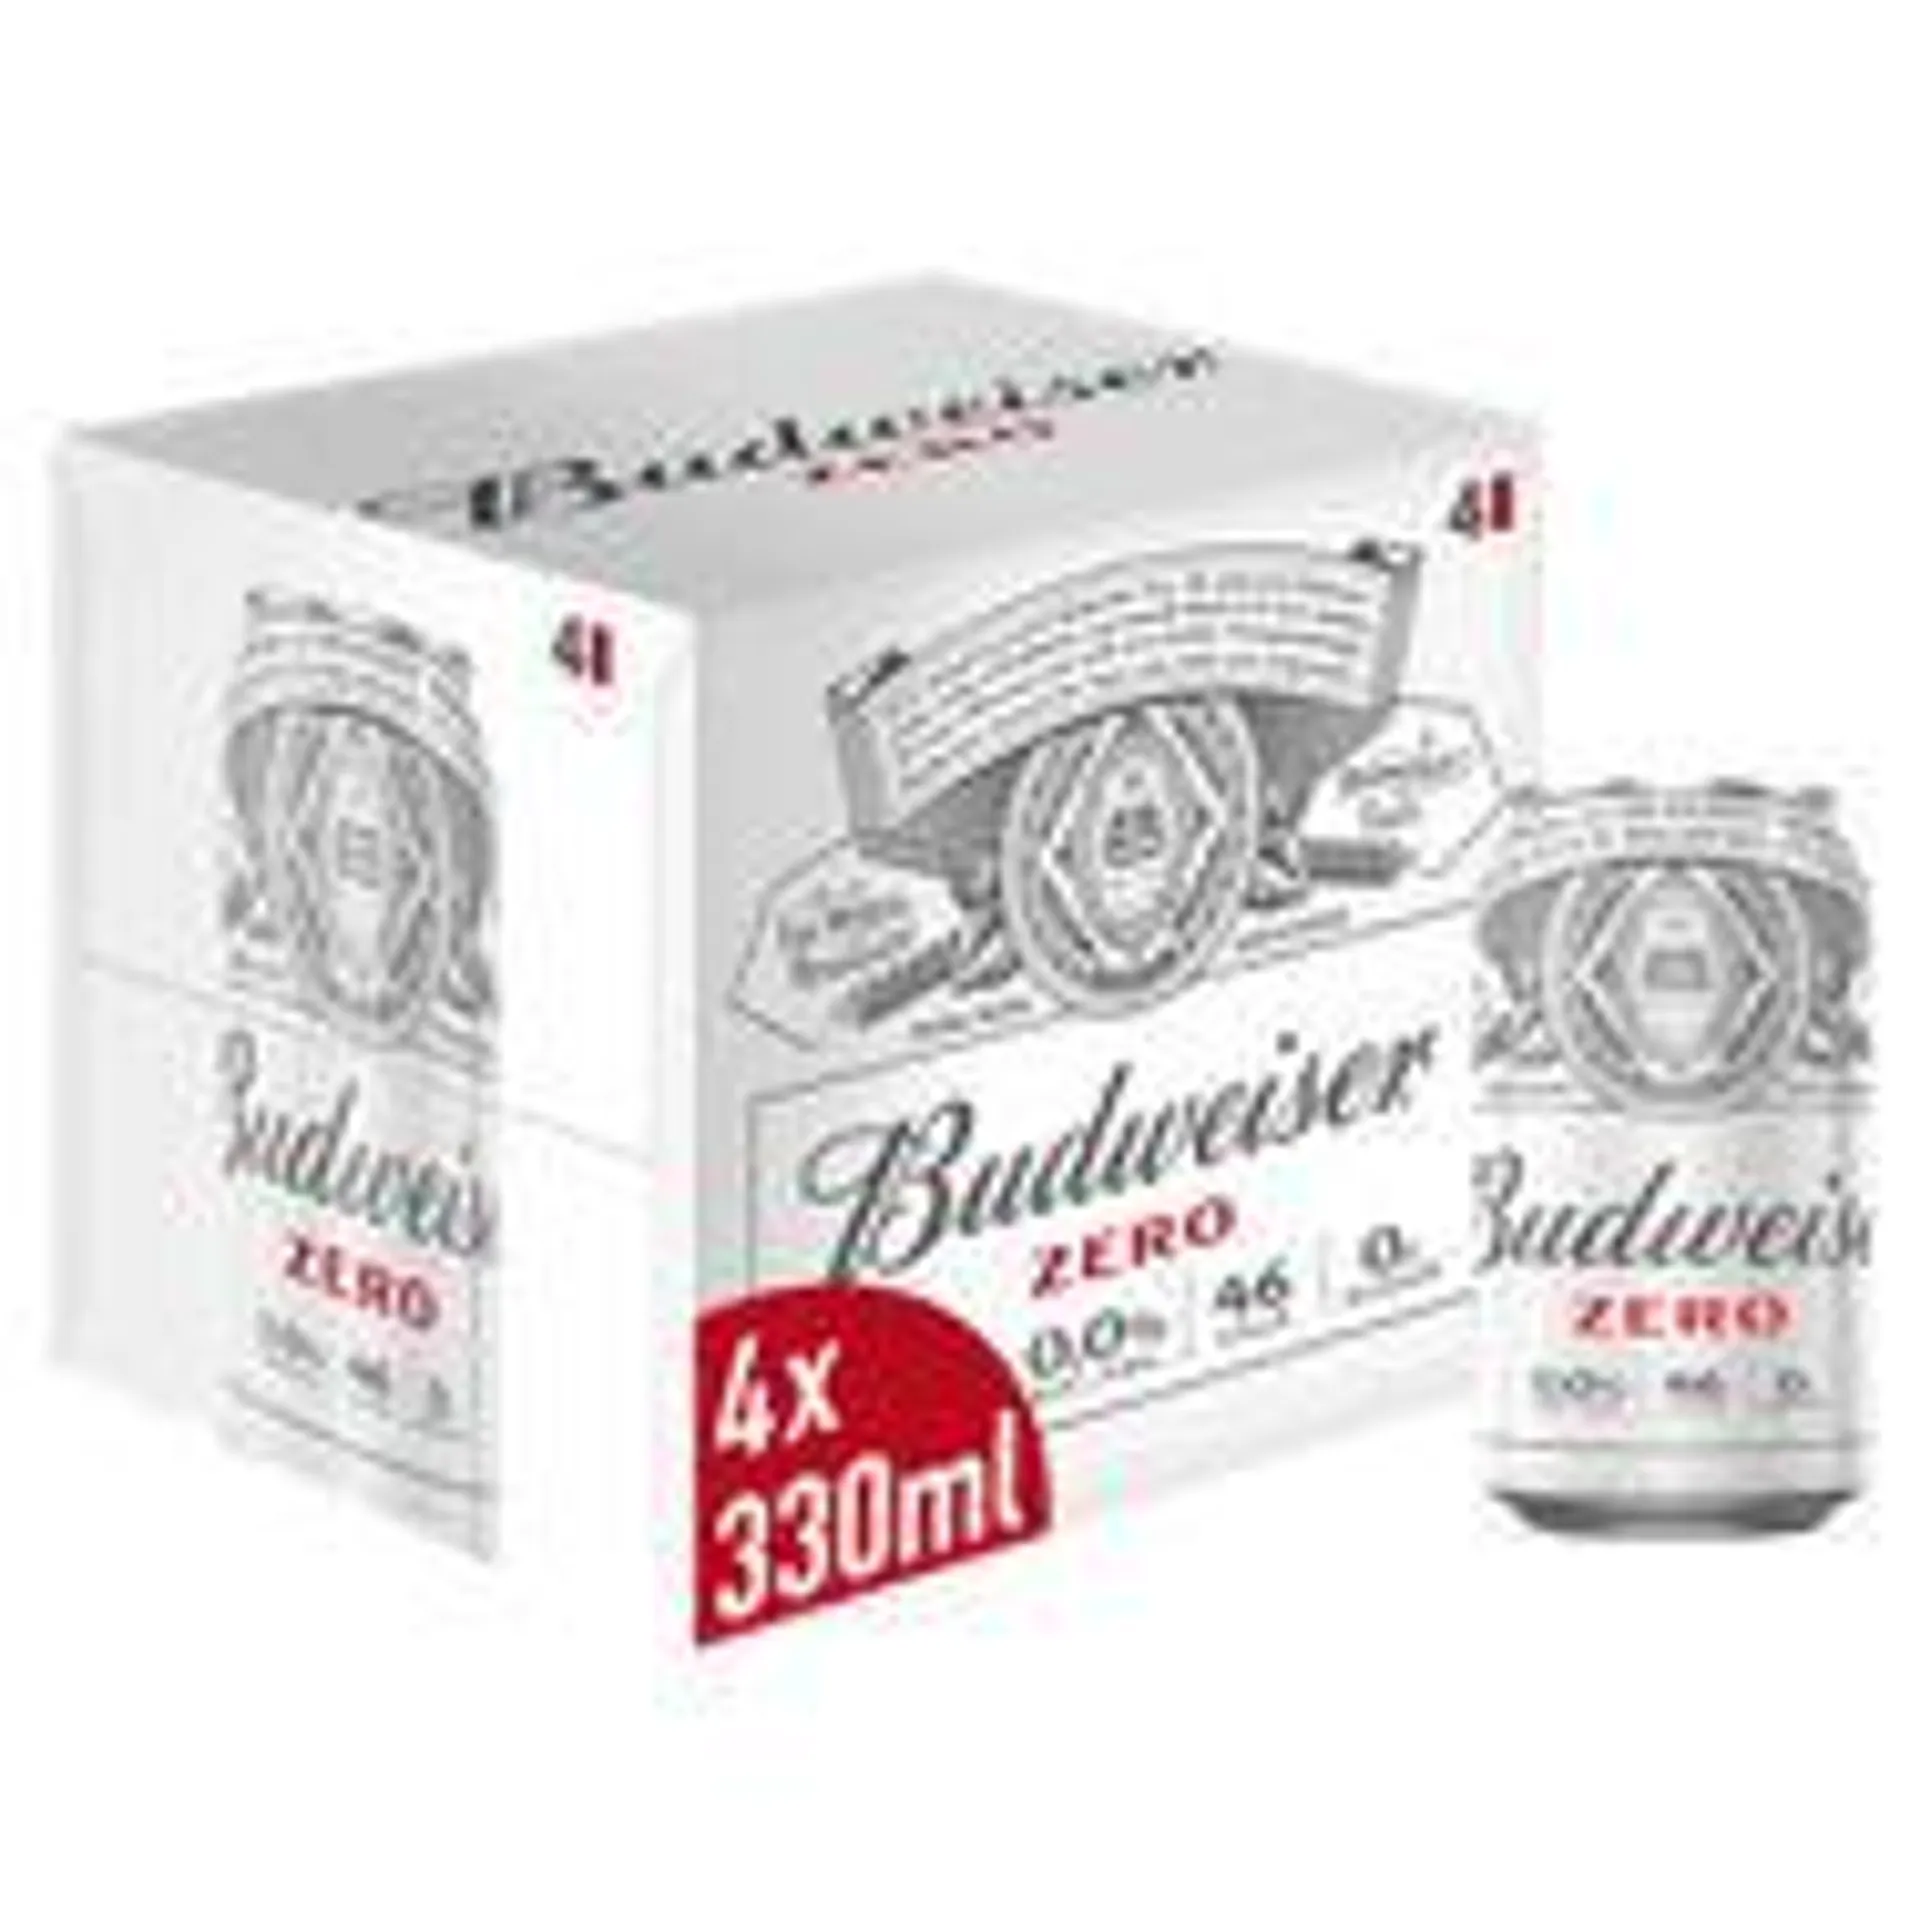 Budweiser Zero Alcohol Free Lager 4 Pack